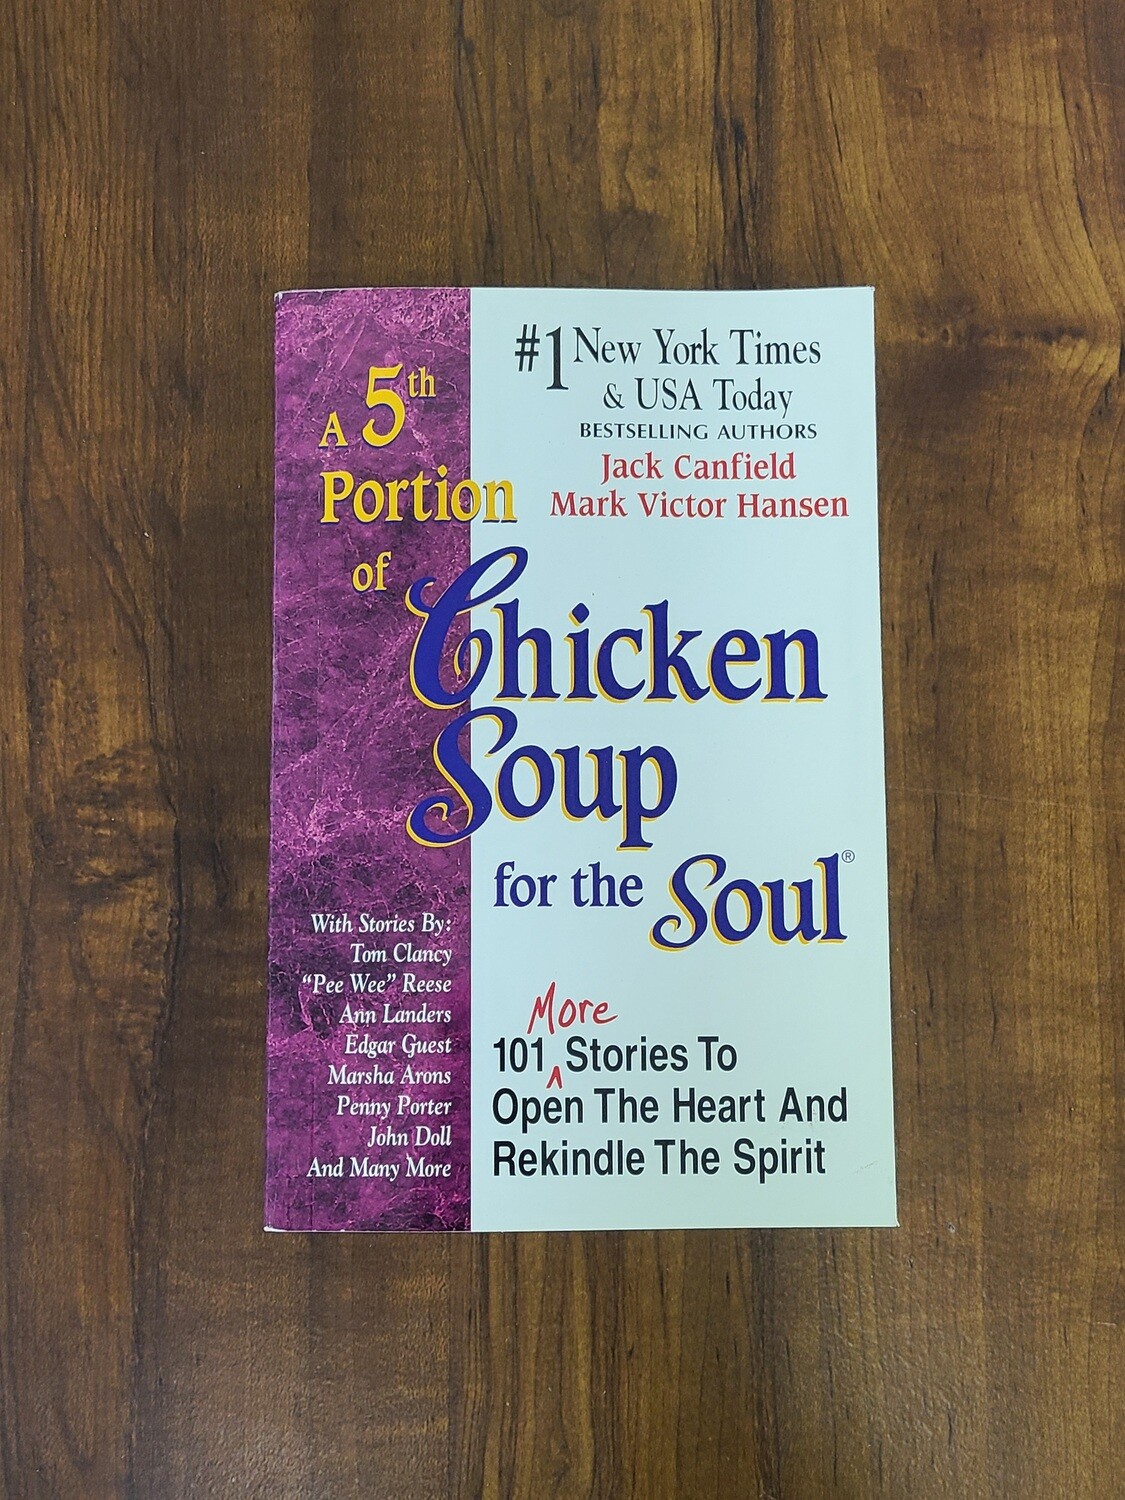 A 5th Portion of Chicken Soup for the Soul by Jack Canfield and Mark Victor Hansen